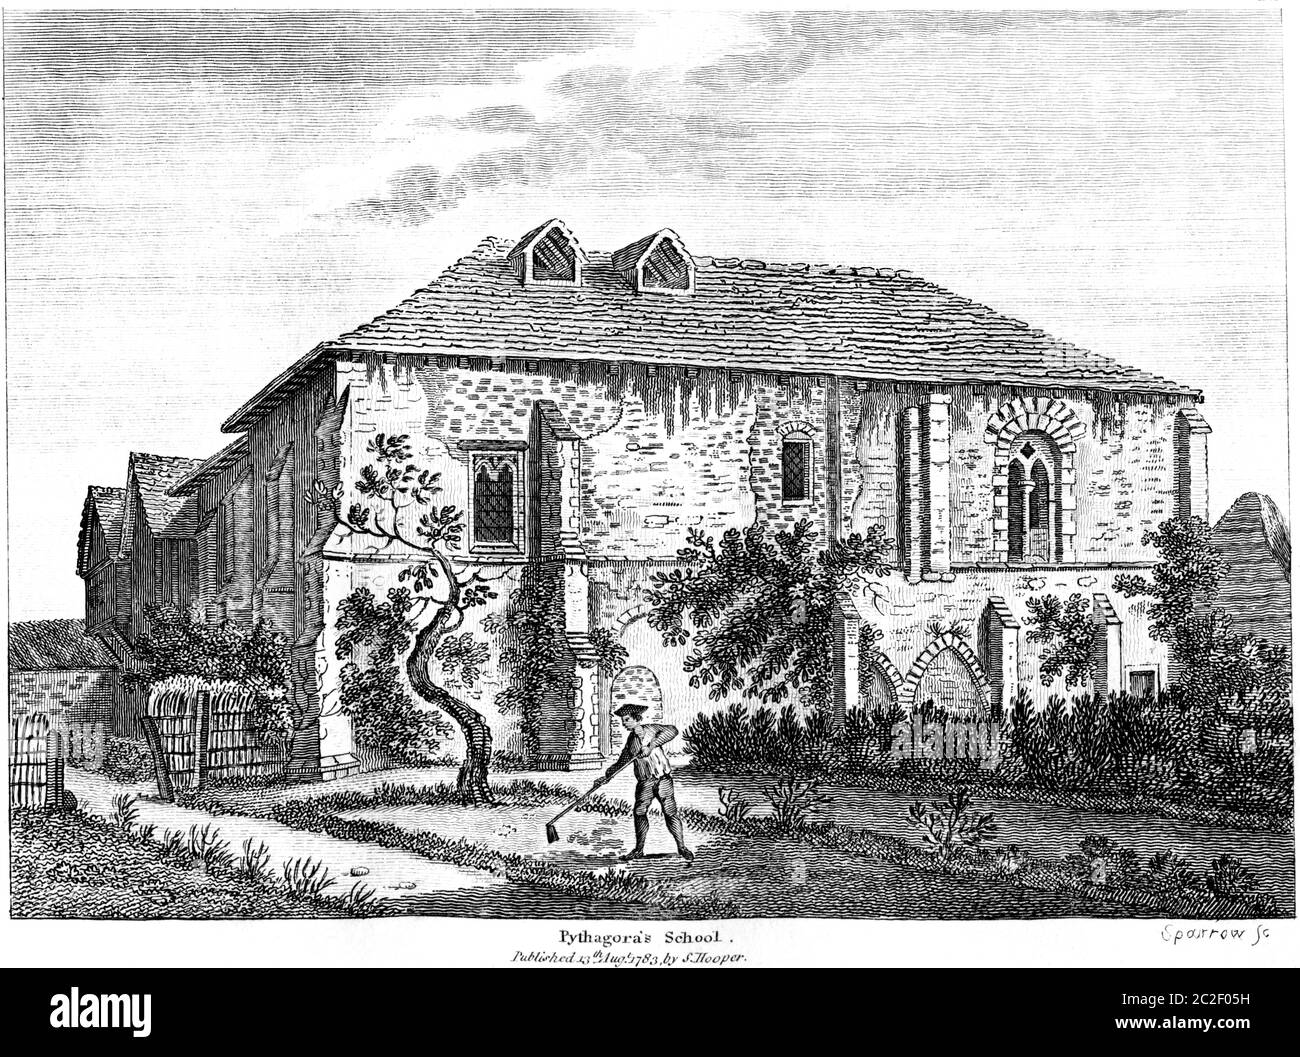 An engraving of Pythagoras School Cambridge 13th August 1783 scanned at high resolution from a book published in the 1780s.  Believed copyright free. Stock Photo